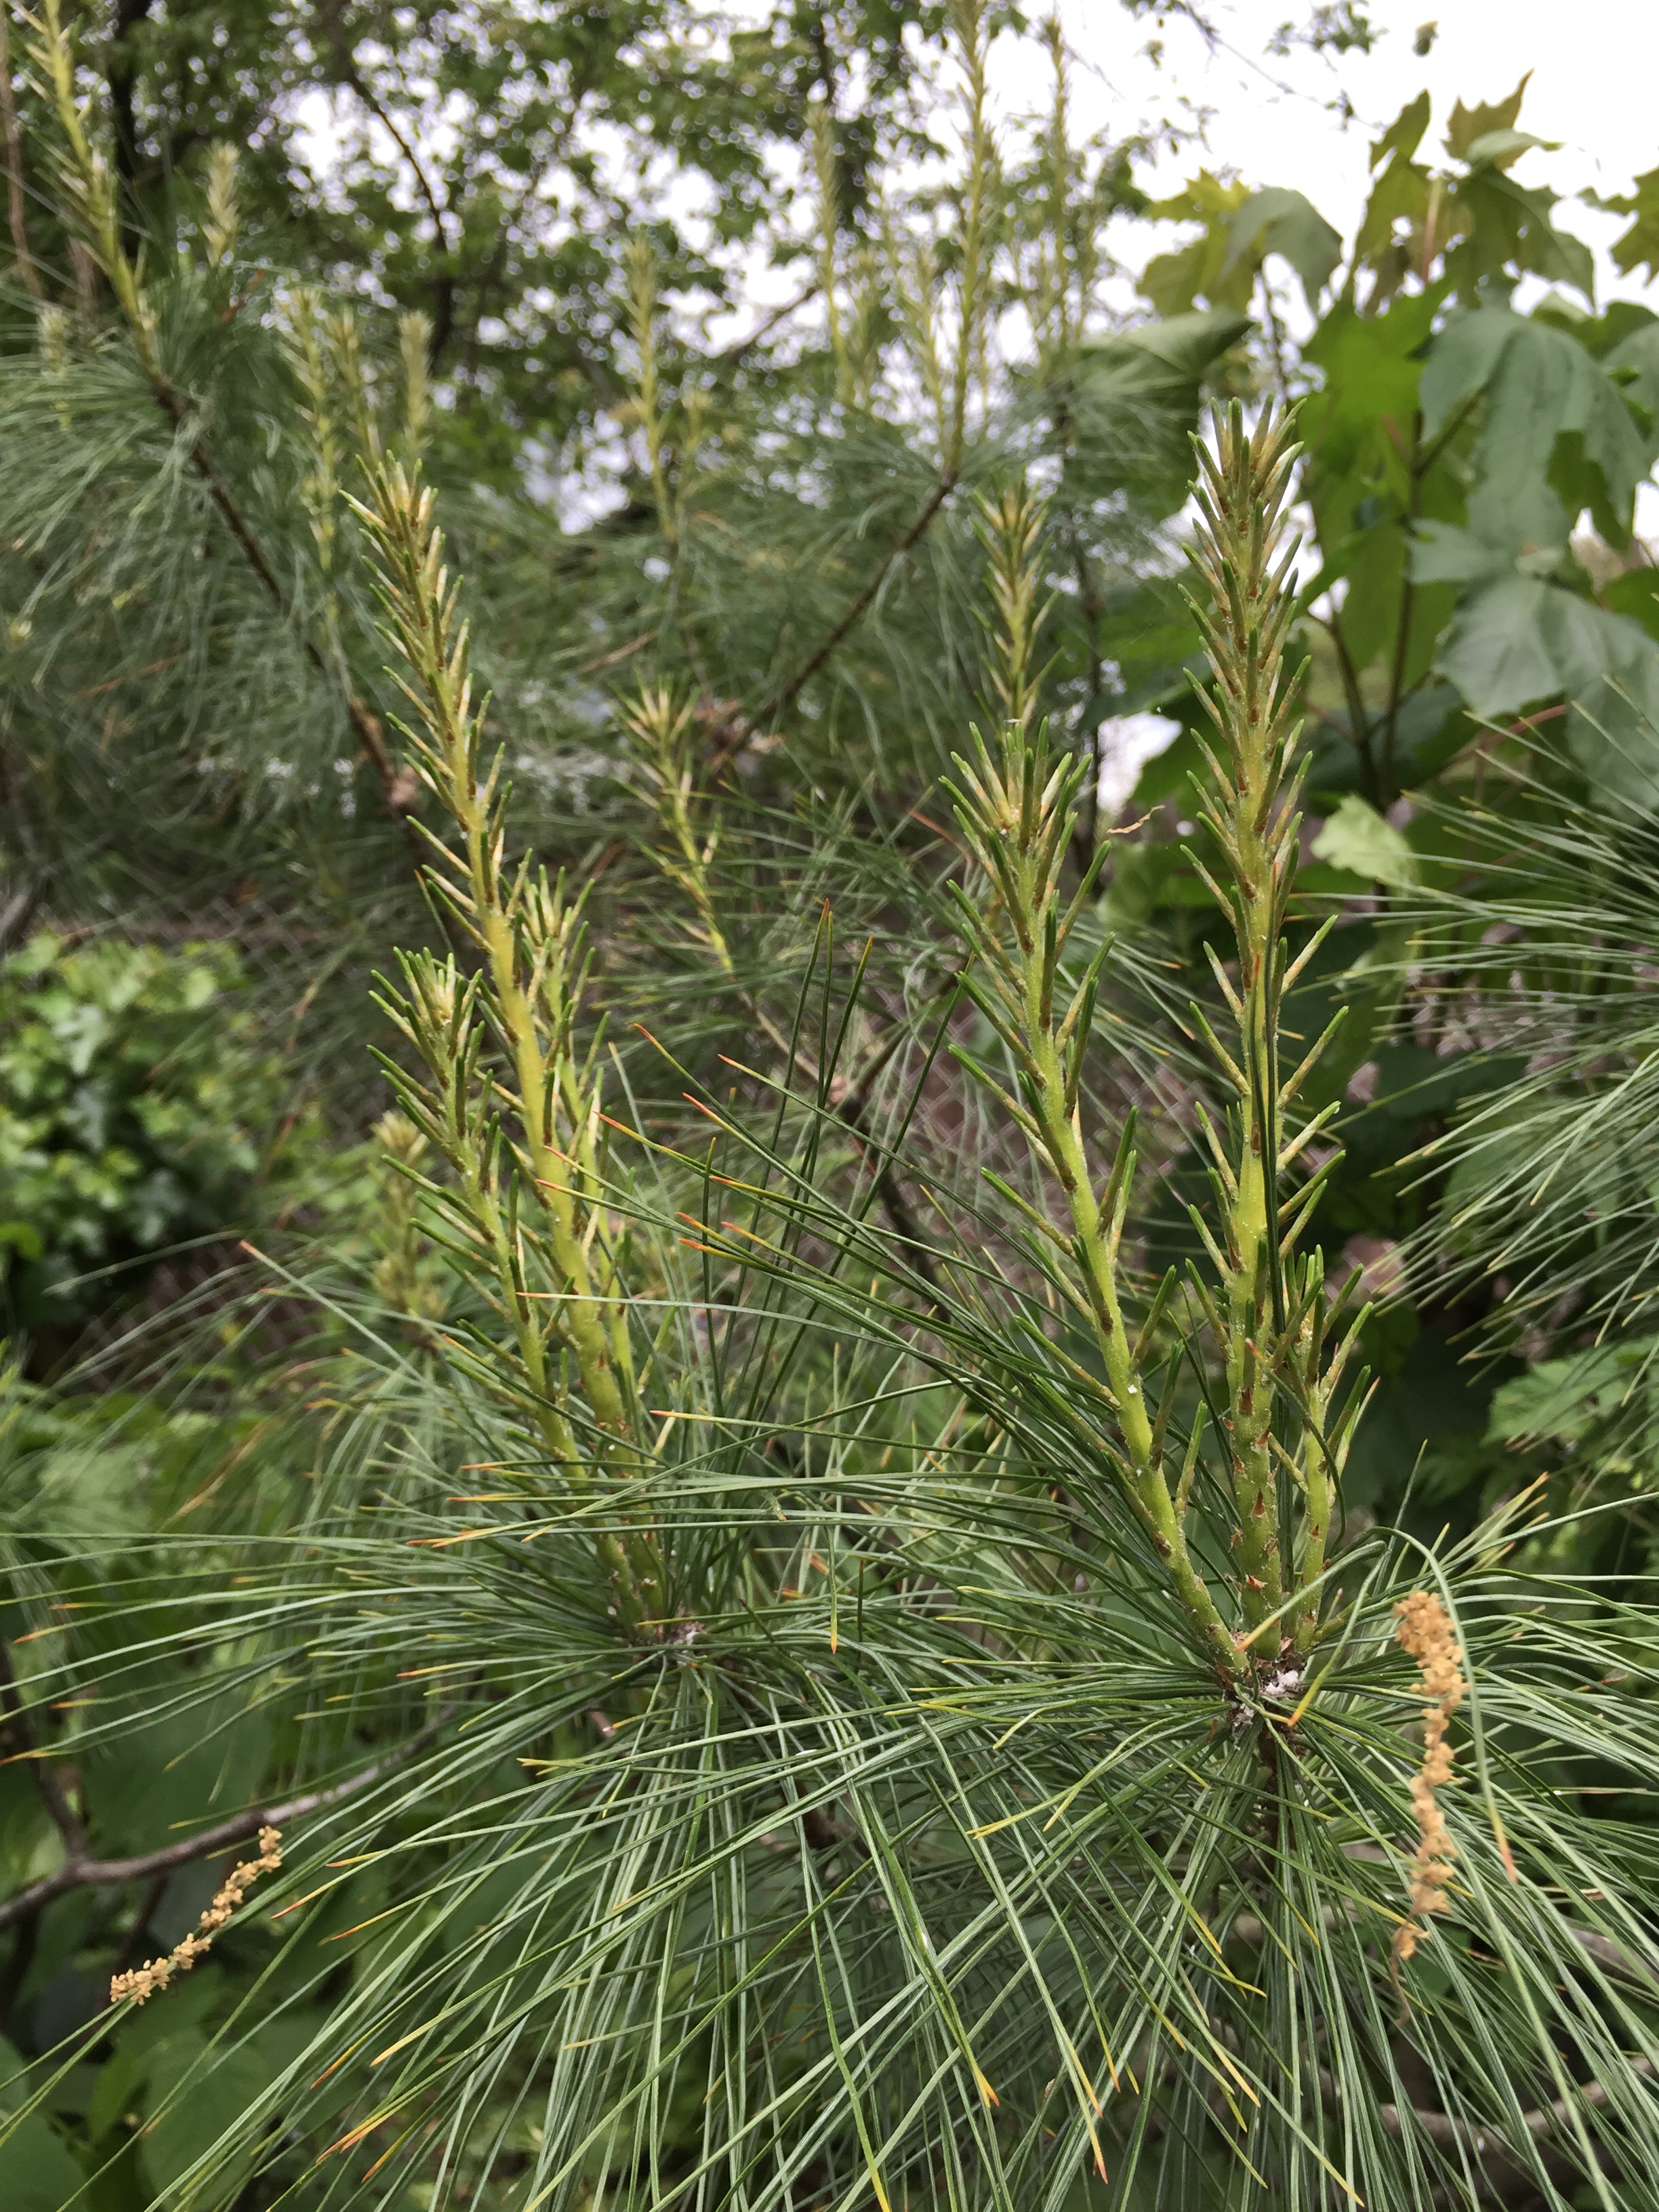 File:2015-05-12 11 46 22 Eastern White Pine candles (new growth) on ...